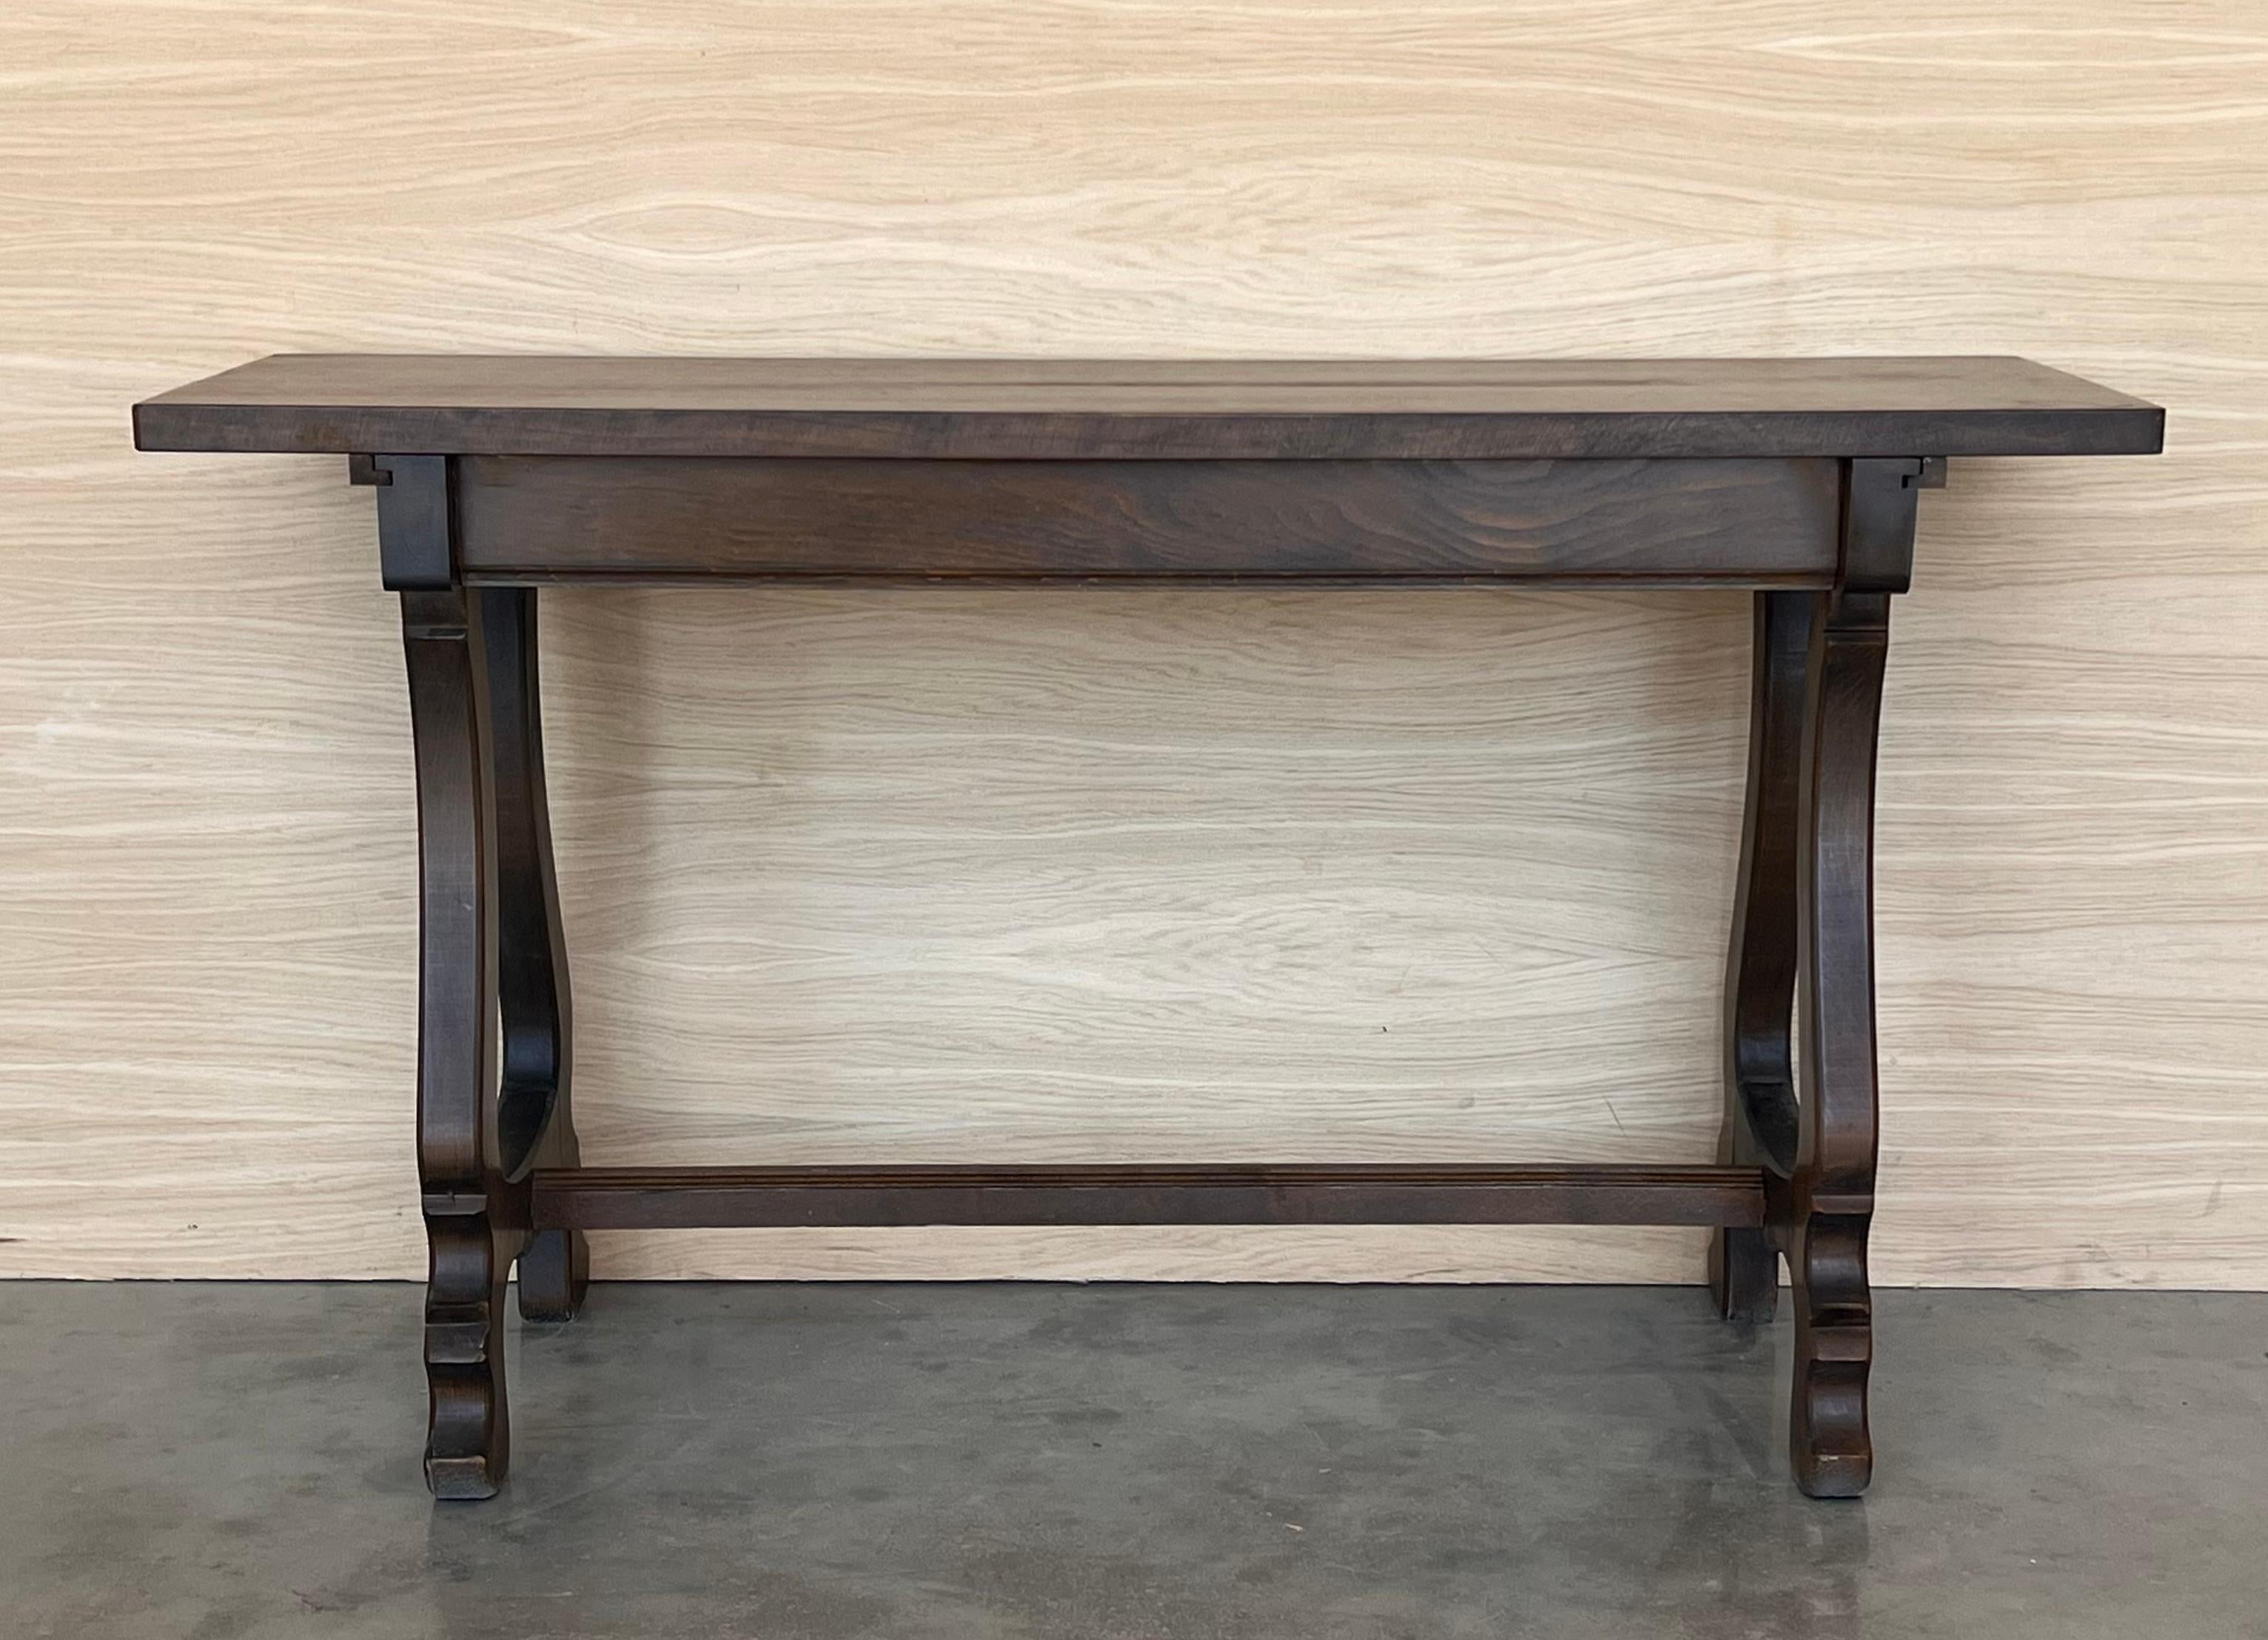 20th century Spanish walnut console farm table
Works as both a dining table and console.
